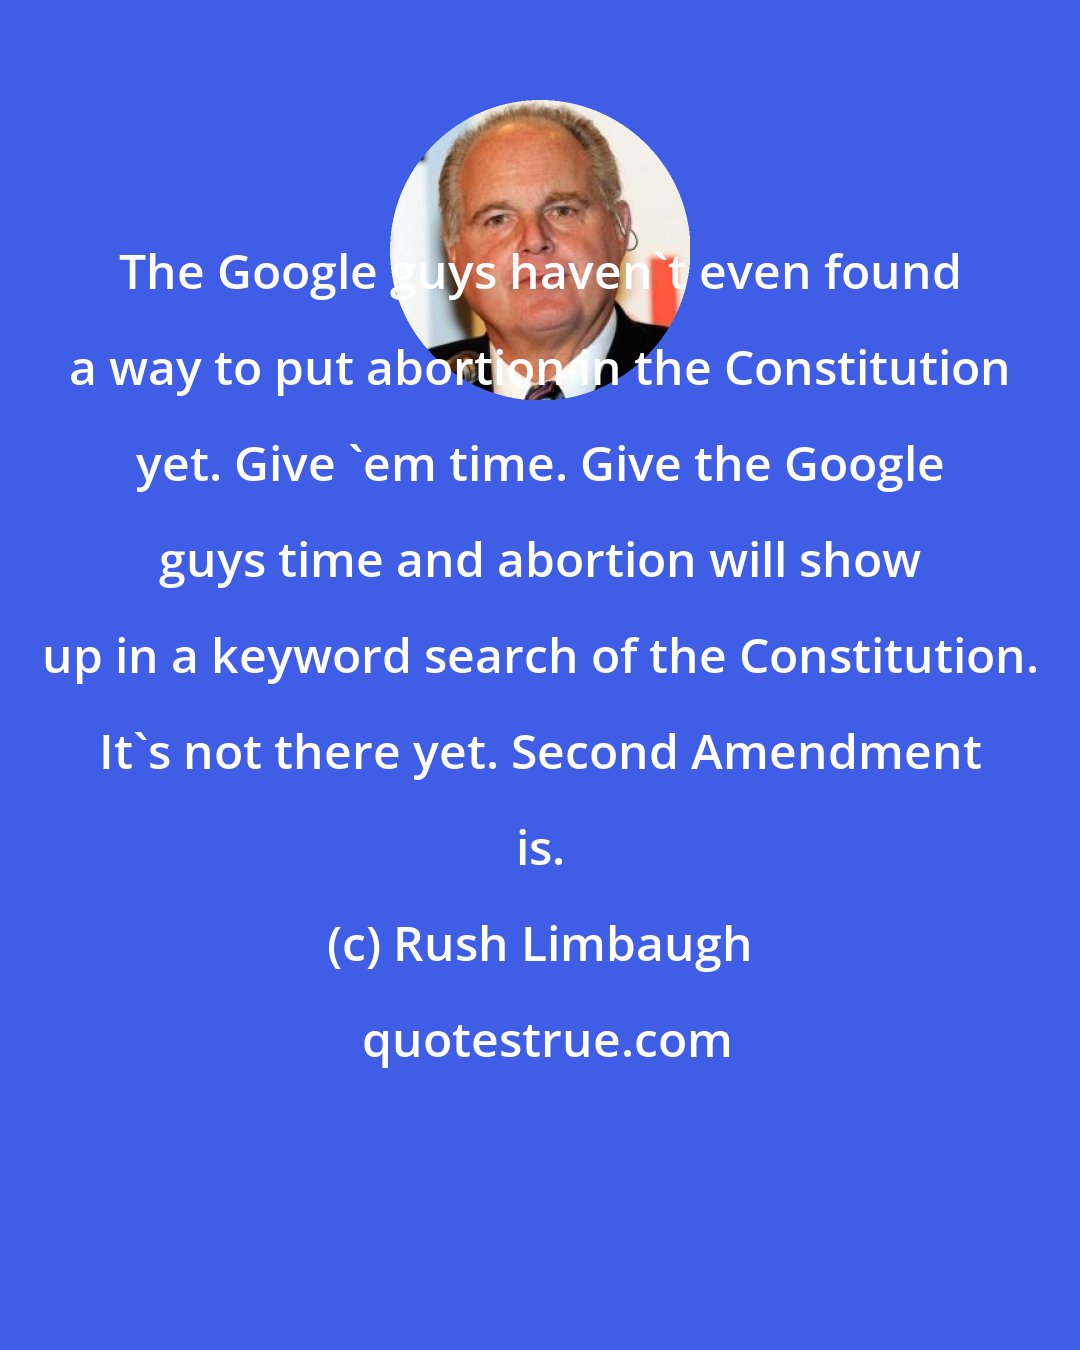 Rush Limbaugh: The Google guys haven't even found a way to put abortion in the Constitution yet. Give 'em time. Give the Google guys time and abortion will show up in a keyword search of the Constitution. It's not there yet. Second Amendment is.